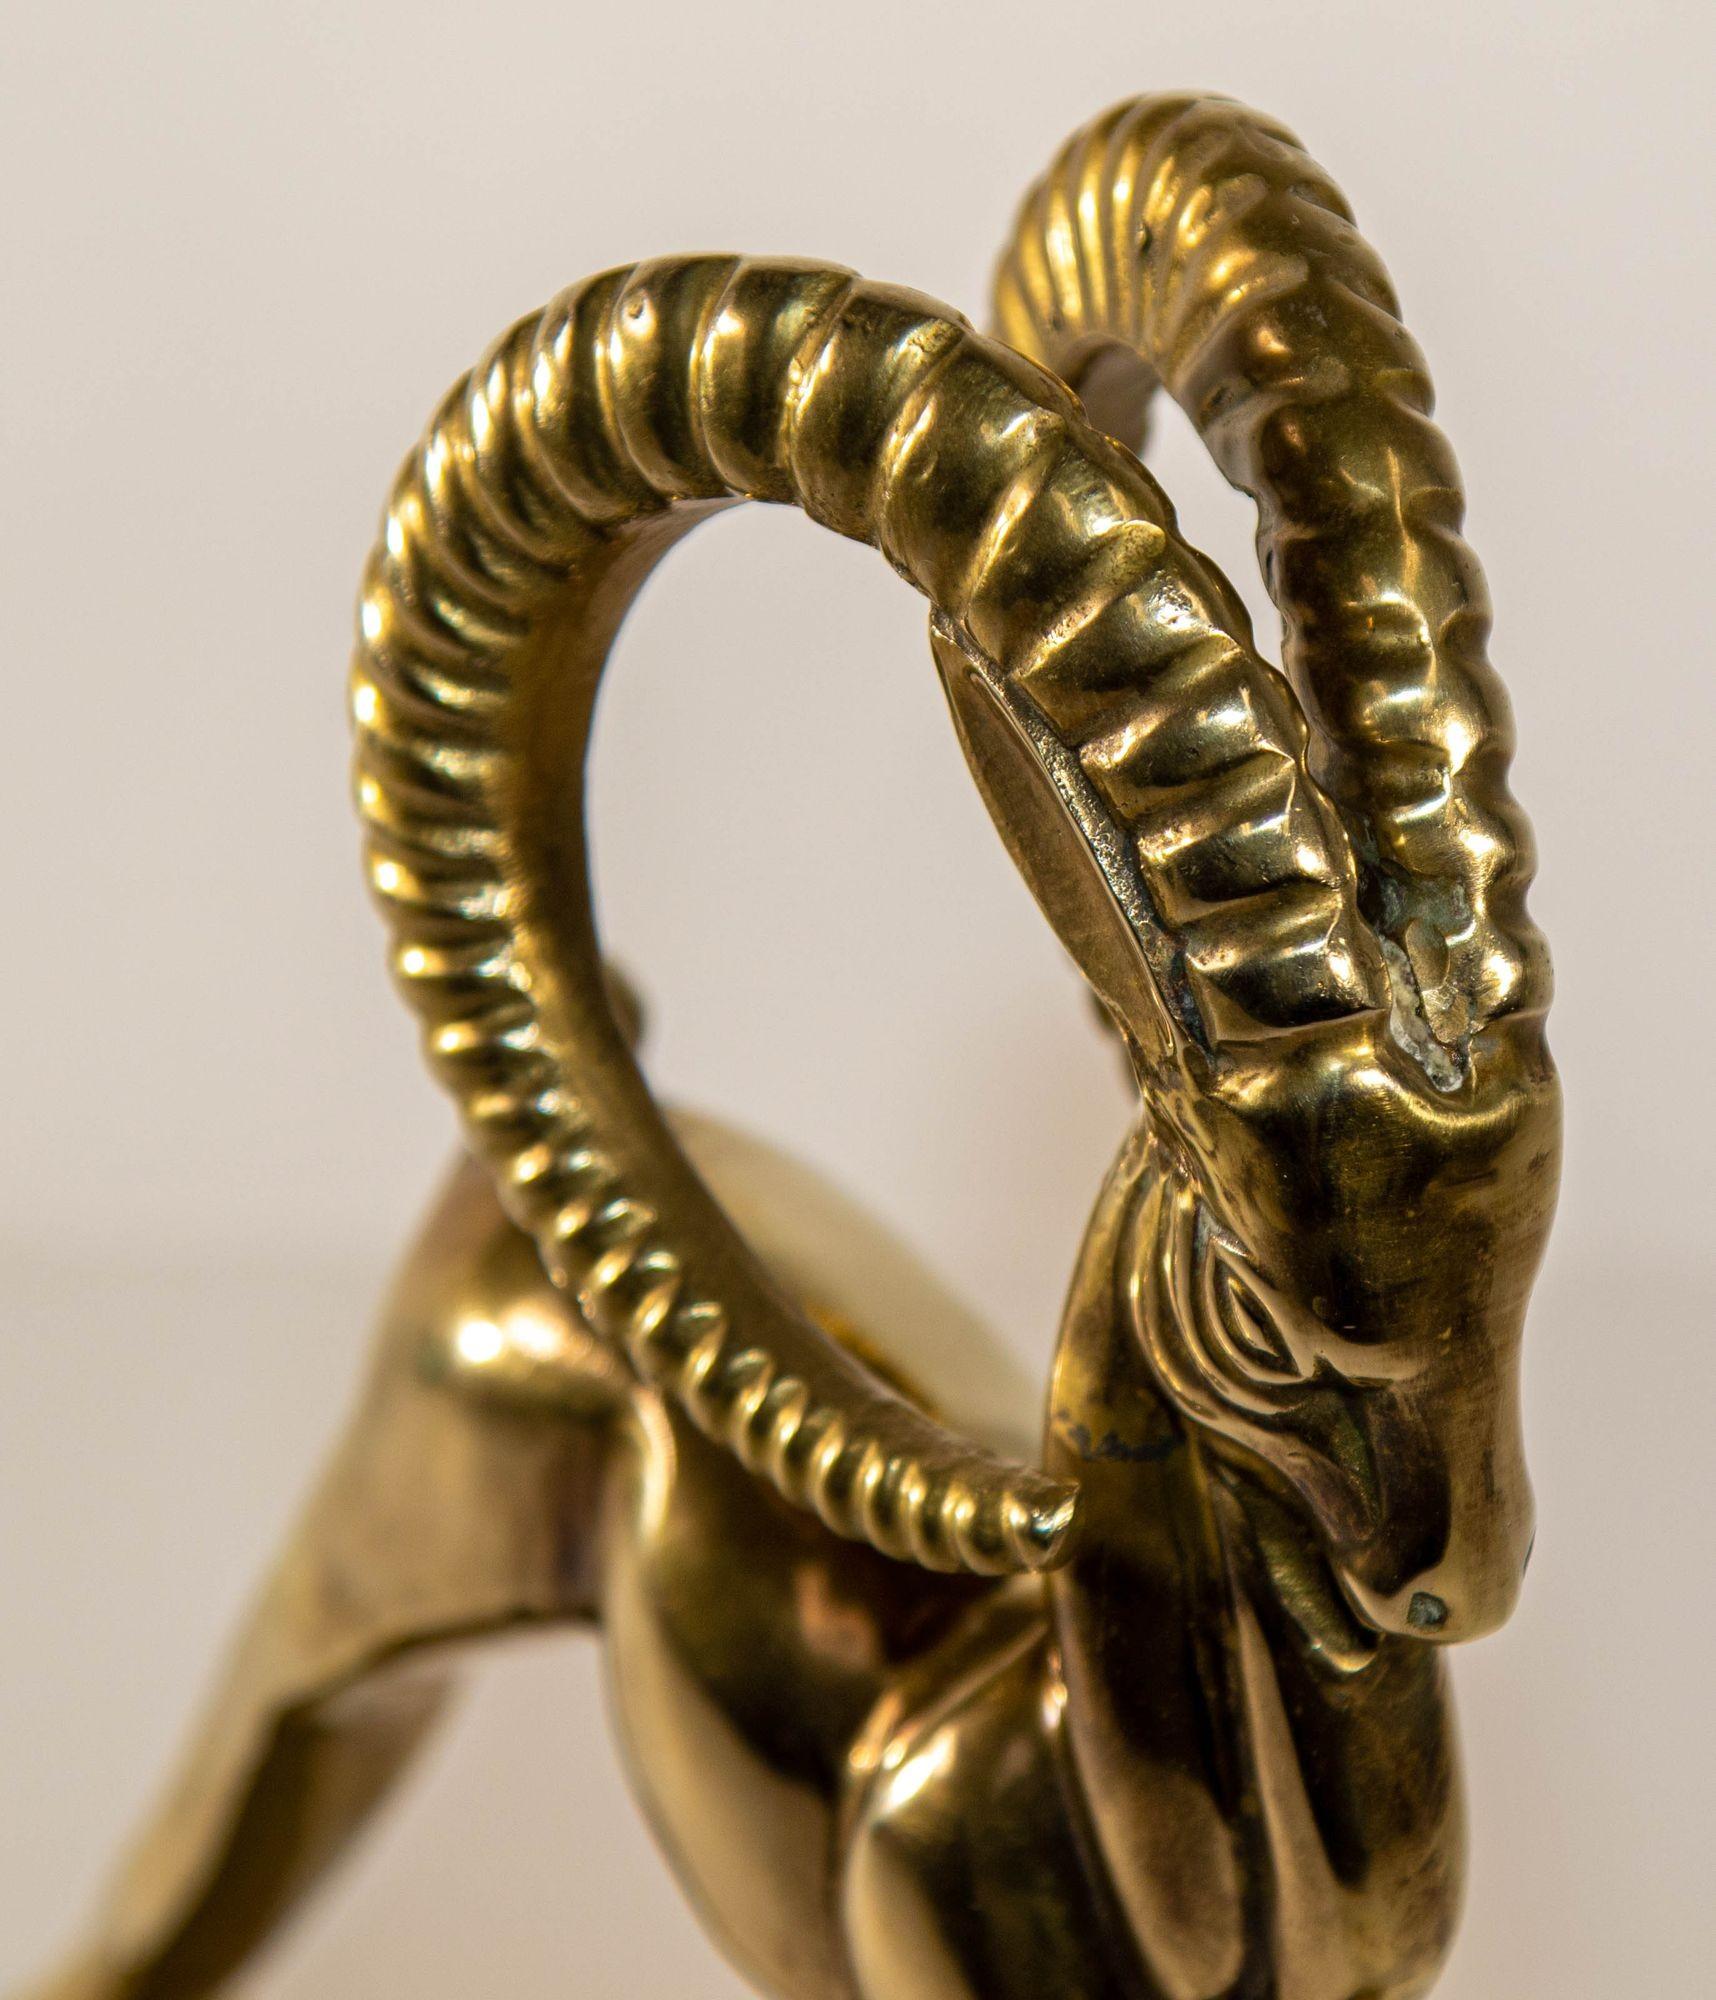 Vintage French Art Deco Style Sculpture of Brass Ibex Antelope For Sale 8